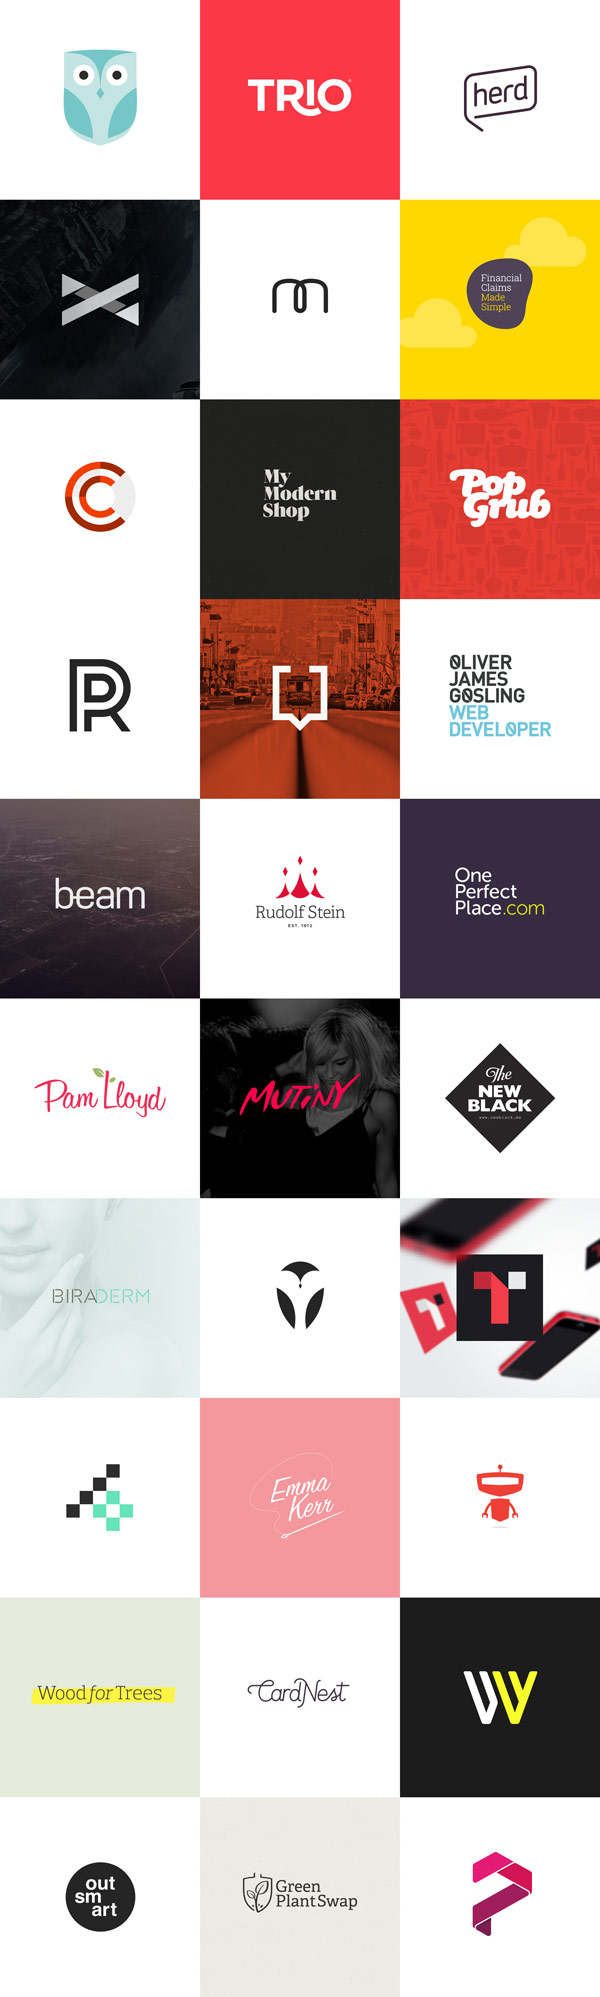 30 Logos by Hype & Slippers